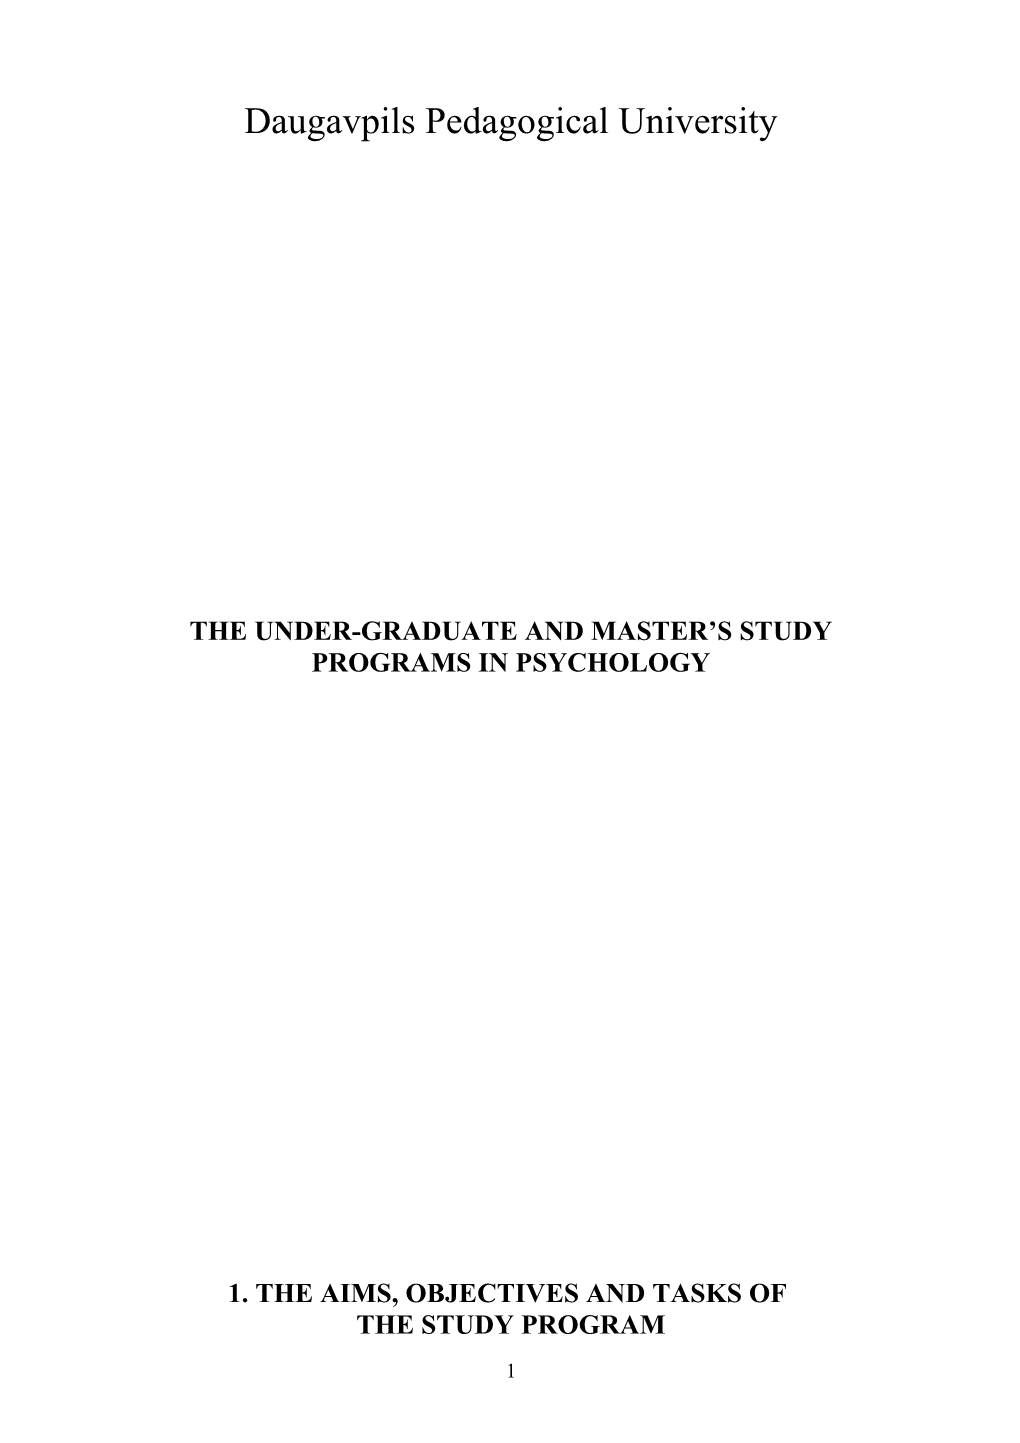 The Under-Graduate and Master S Study Programs in Psychology